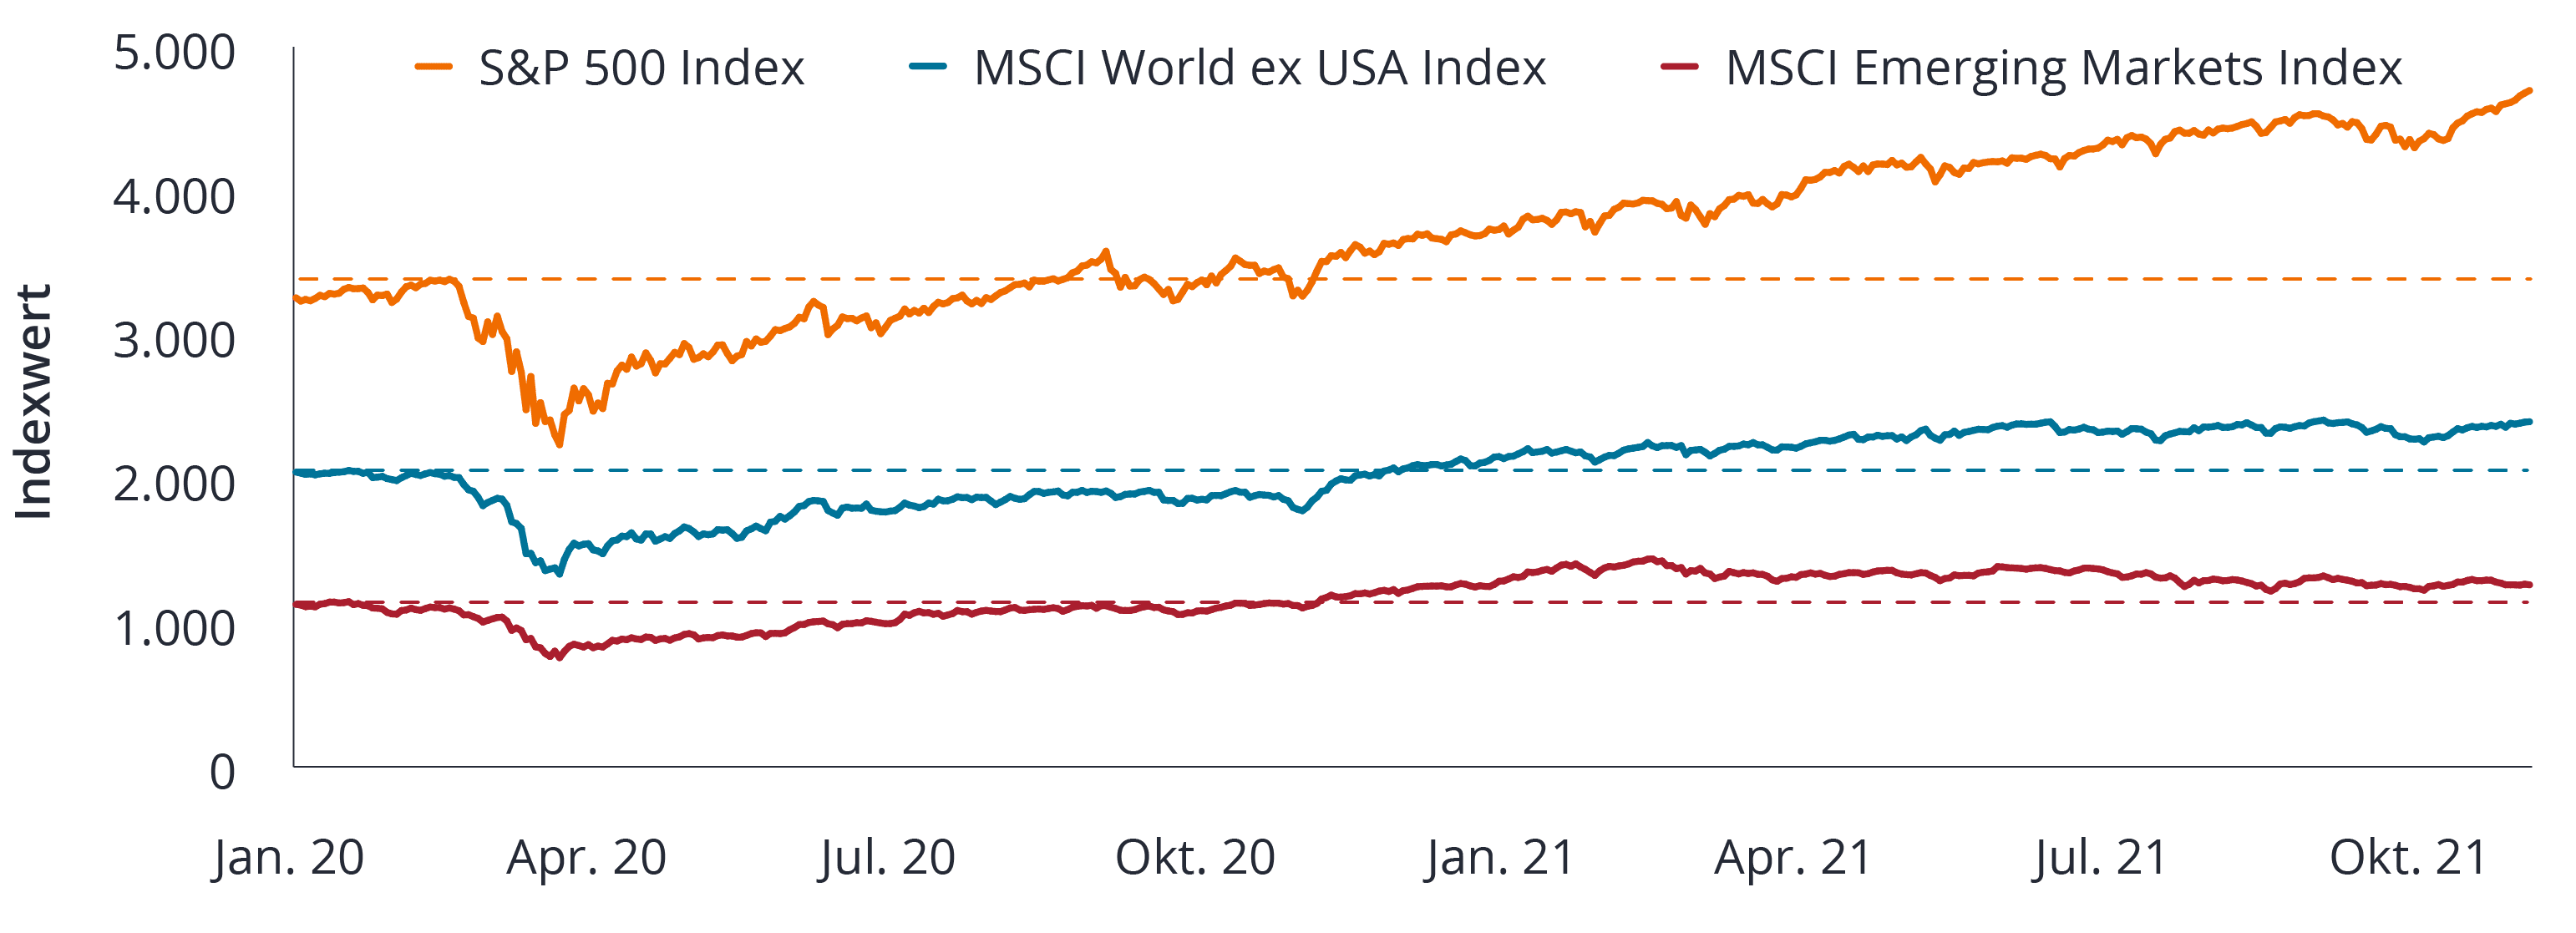 Chart: Stocks rebound - Index values for S & P Index, MSCI World ex USA Index and MSCI Emerging Markets Index